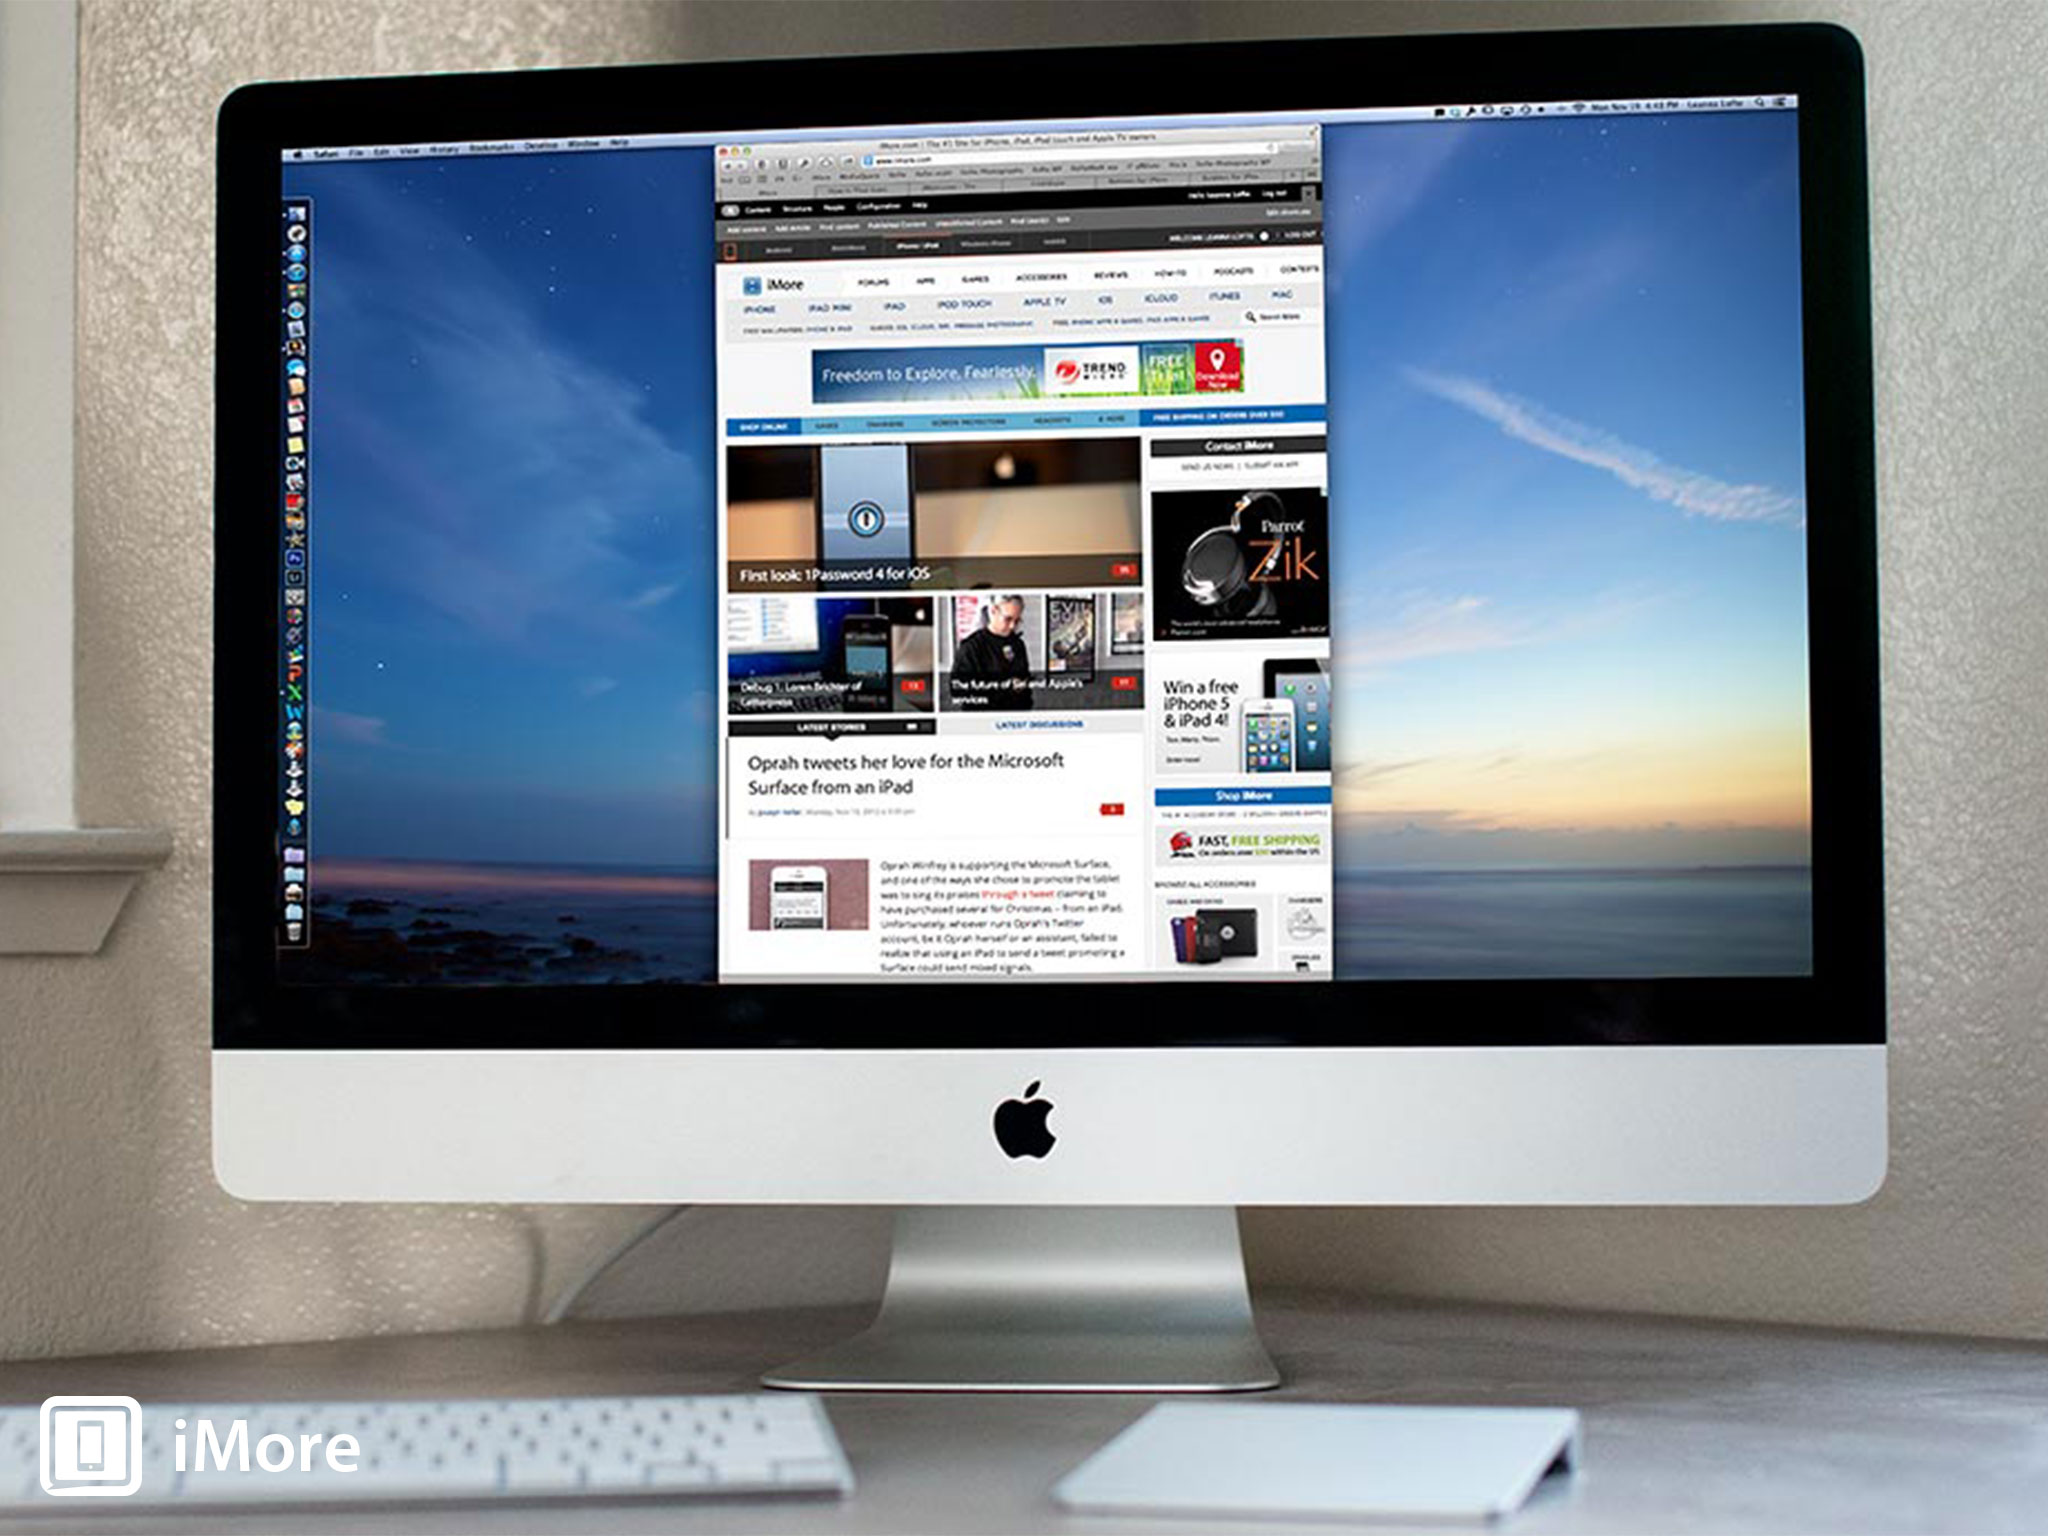 Apple introduces new 21.5-inch iMac starting at 099